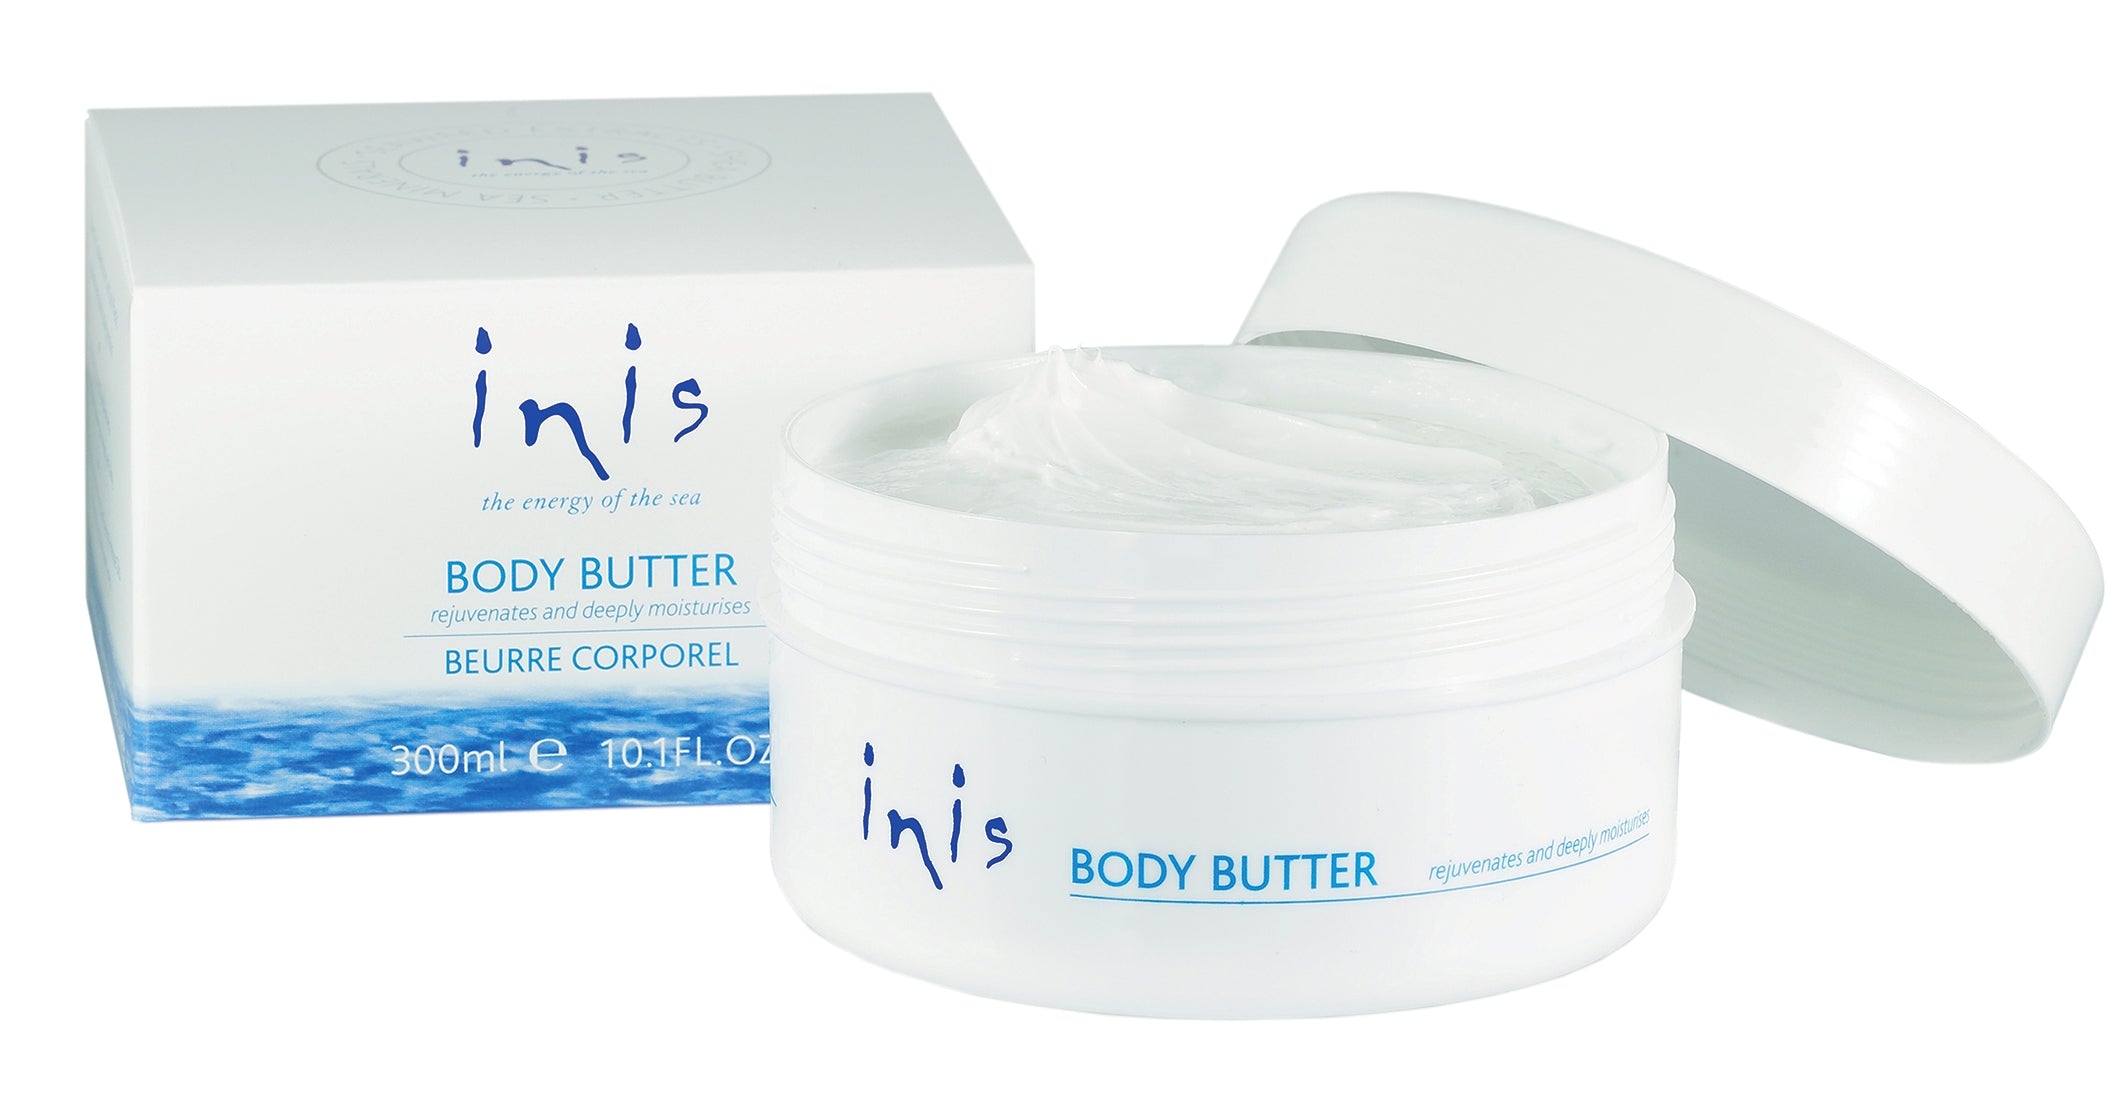 Inis Body Butter – The Donegal Shop